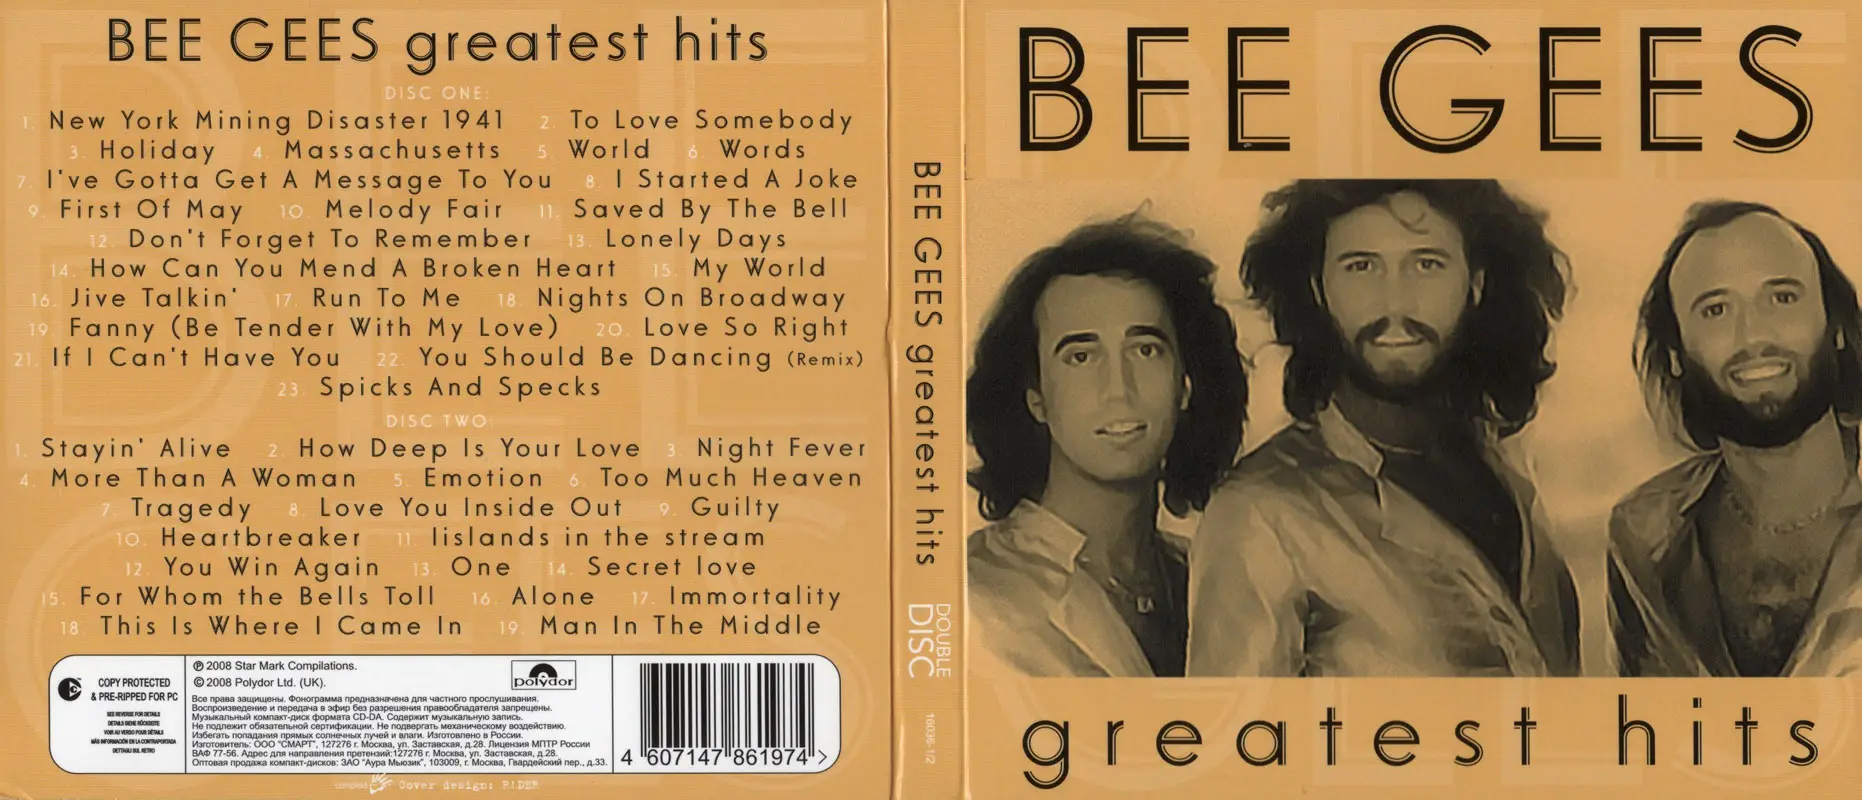 bee gees greatest hits you tube